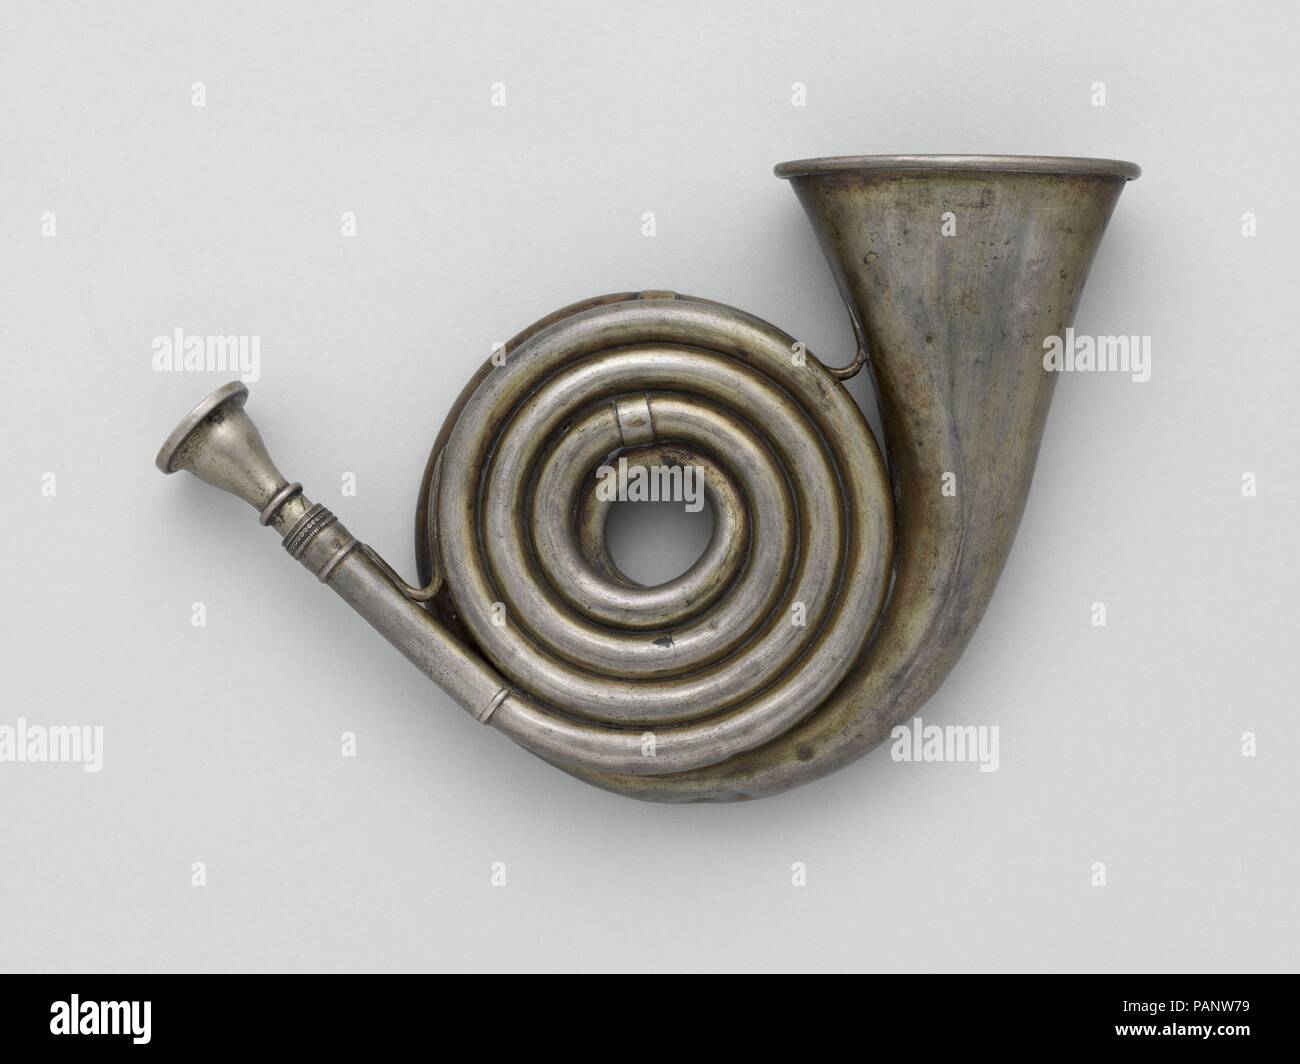 Pocket Post Horn in G. Culture: Italian. Dimensions: Height: 4 13/16 in. (12.3 cm)  Diameter: 2 15/16 in. (7.5 cm). Maker: Giuseppe Pelitti (Italian, Varese 1811-1865 Milan). Date: ca. 1880.  This horn is 5 ½ feet long, but its tightly coiled tubing and small, oval-shaped bell enabled it to be carried with ease in a pocket. This compact form of the horn was used for the 'small hunt' of rabbits, squirrels and other small game pursued on foot. Museum: Metropolitan Museum of Art, New York, USA. Stock Photo